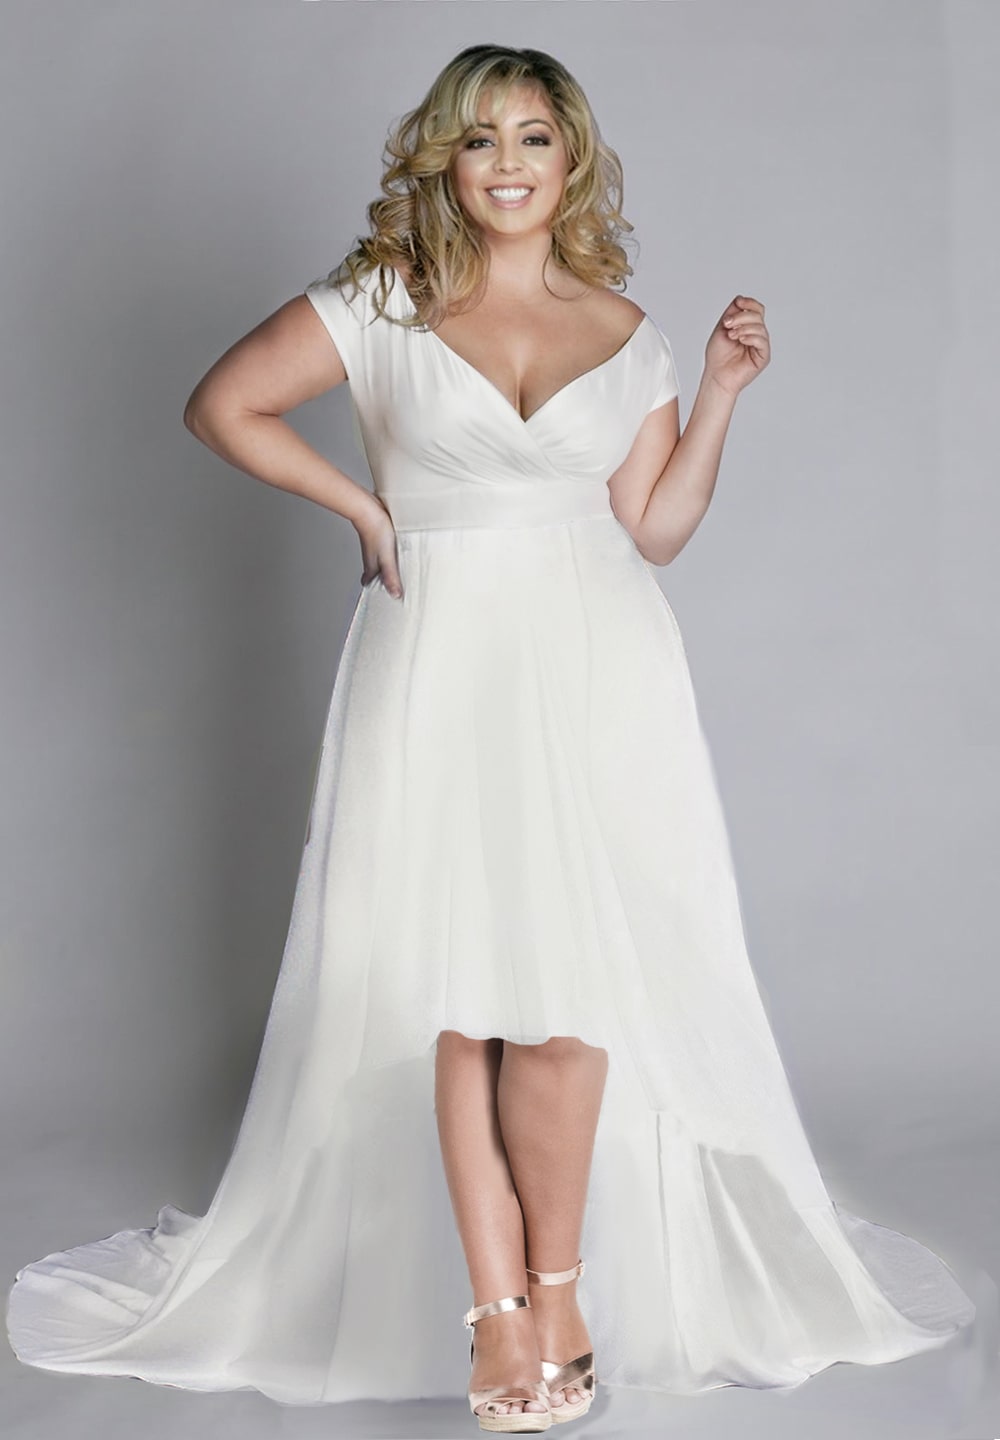 Contemporary Bridal Brands Offering Elegant Plus Size Gowns